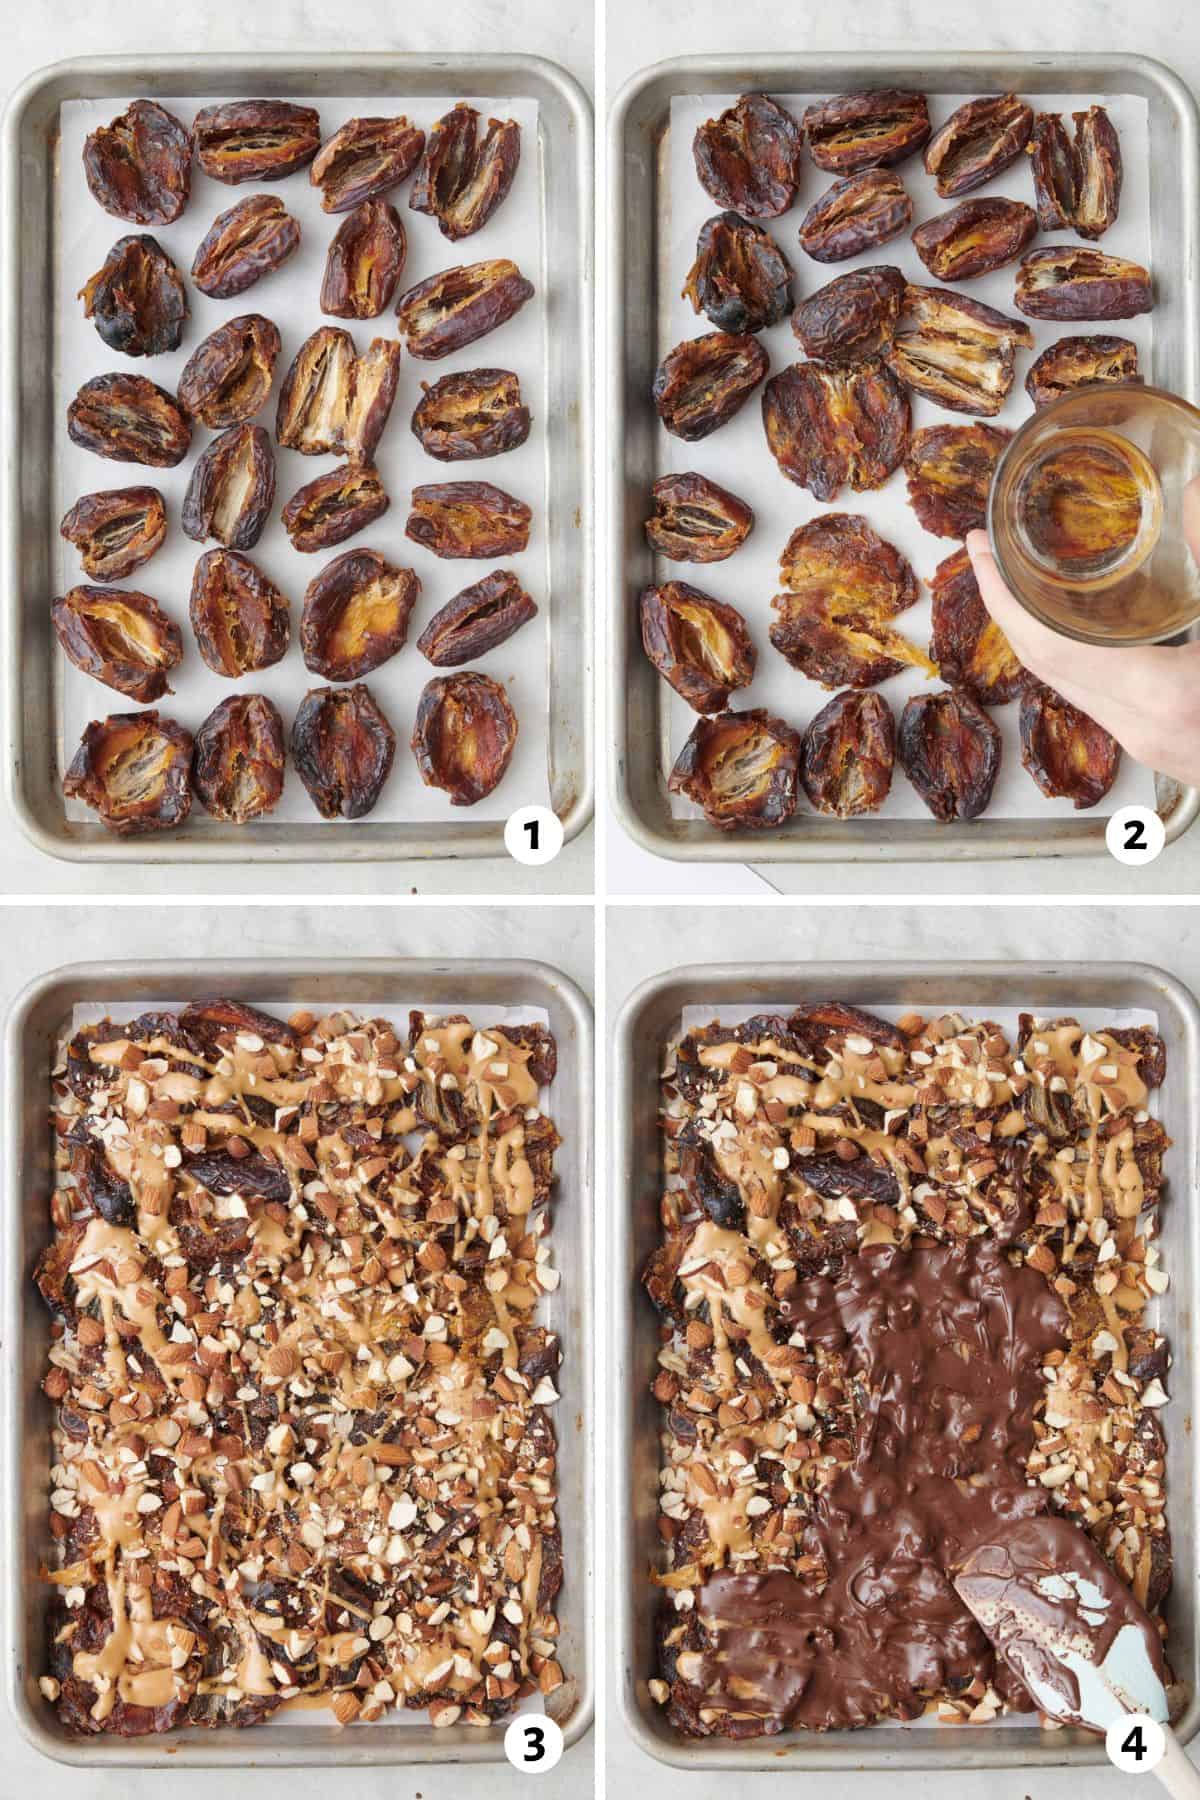 4 image collage making recipe: 1-pitted dates on a sheet pan, 2- glass pressing dates flat, 3- peanut butter drizzled on top with chopped almonds, and 4- spreading melted chocolate on top.